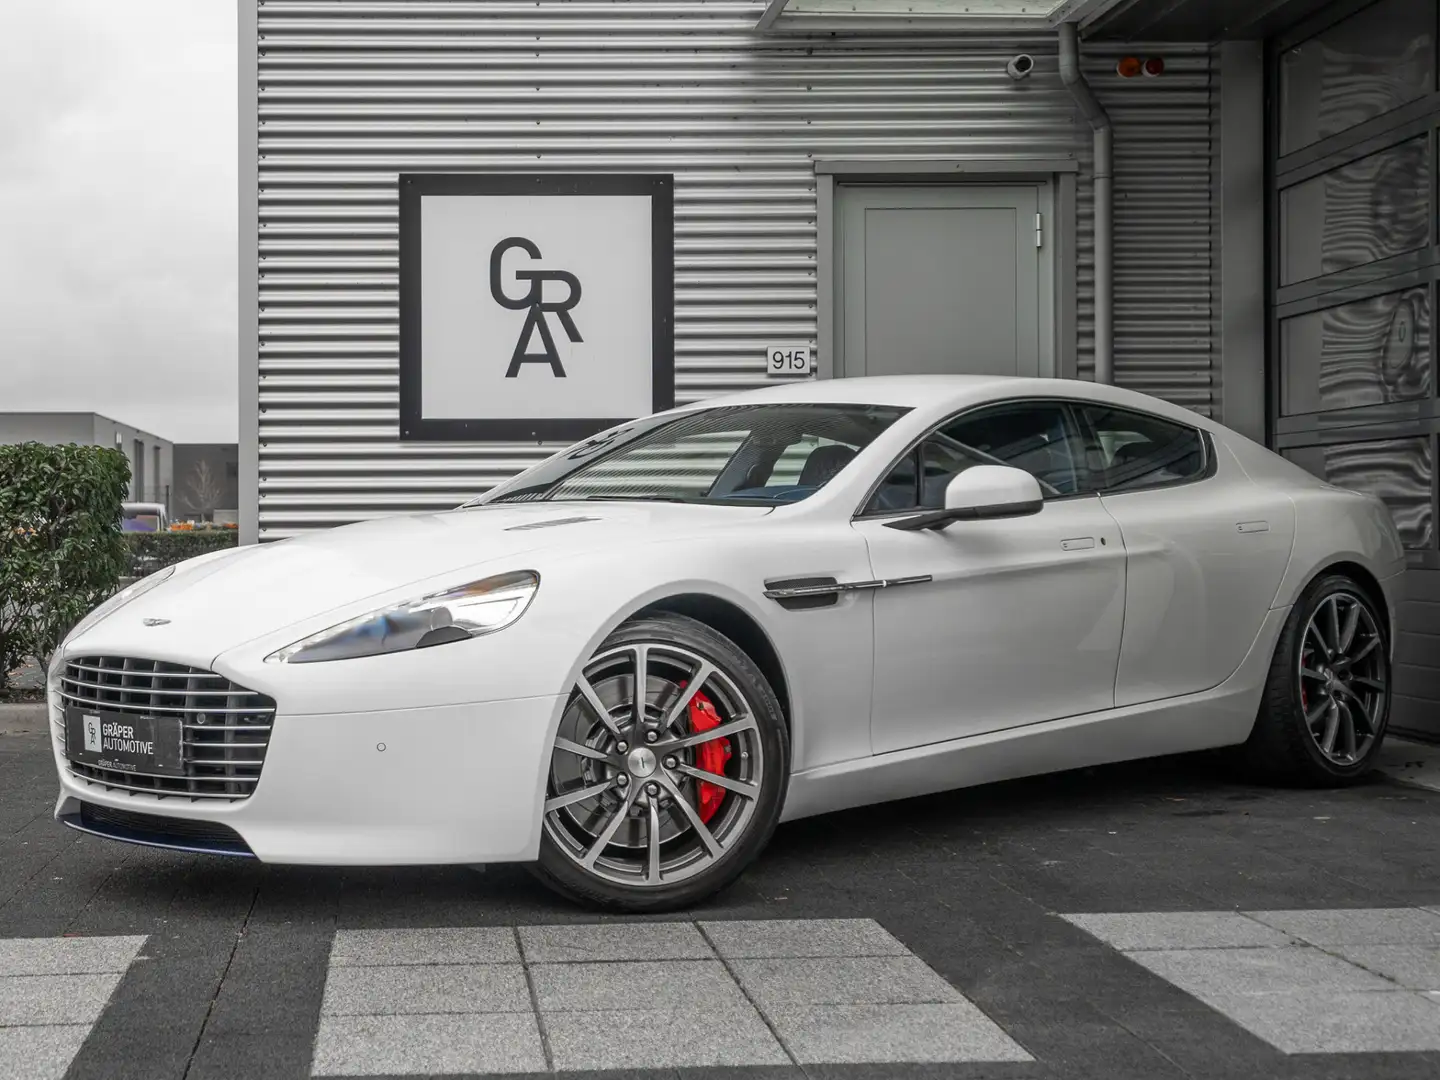 Aston Martin Rapide S 6.0 V12 ‘Britain is Great’ Edition by Q 1/8 White - 2